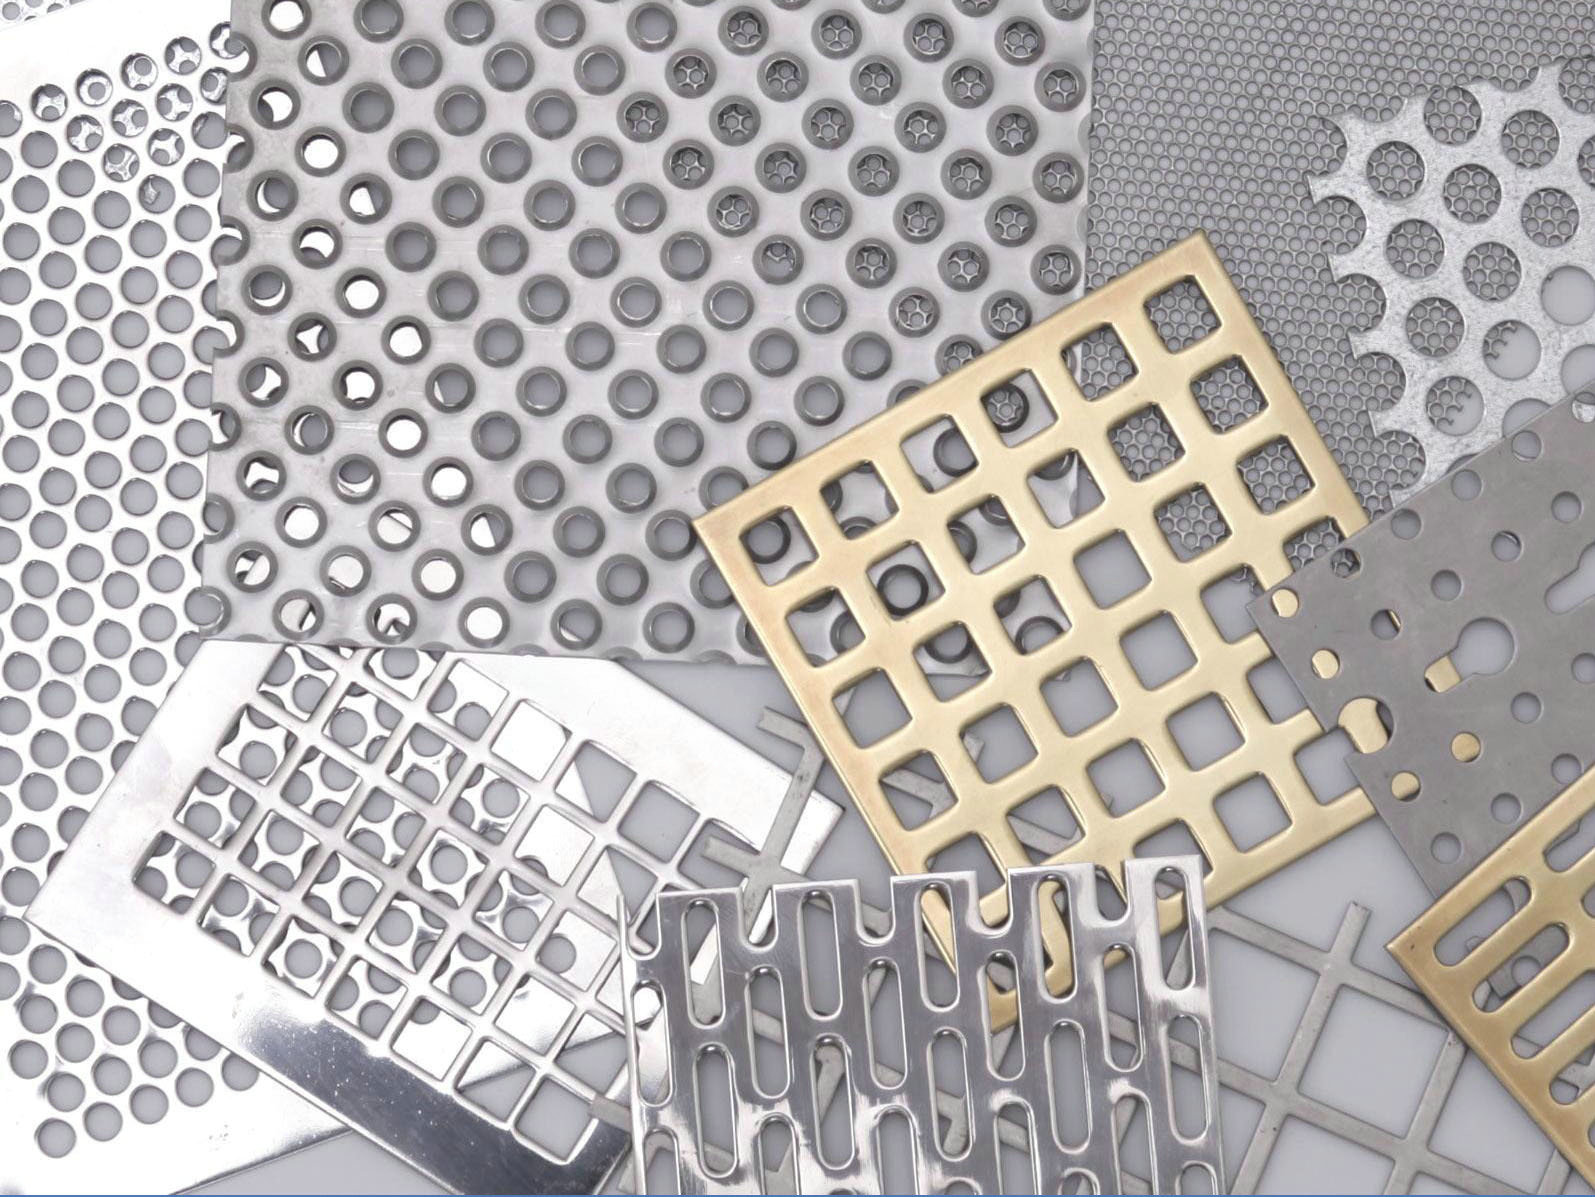 The feature of perforated metal mesh